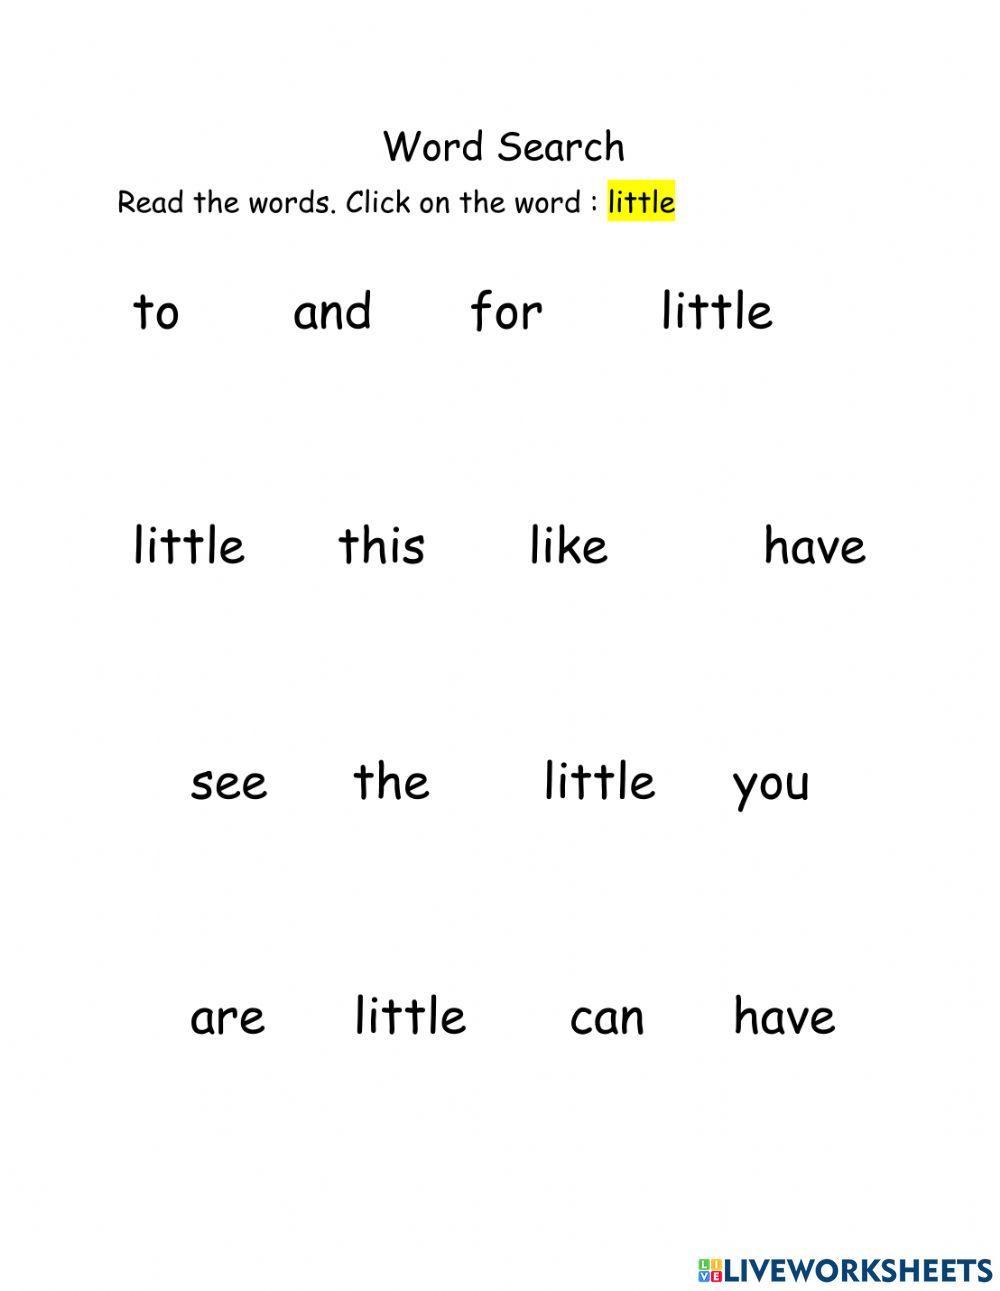 Word Search: little